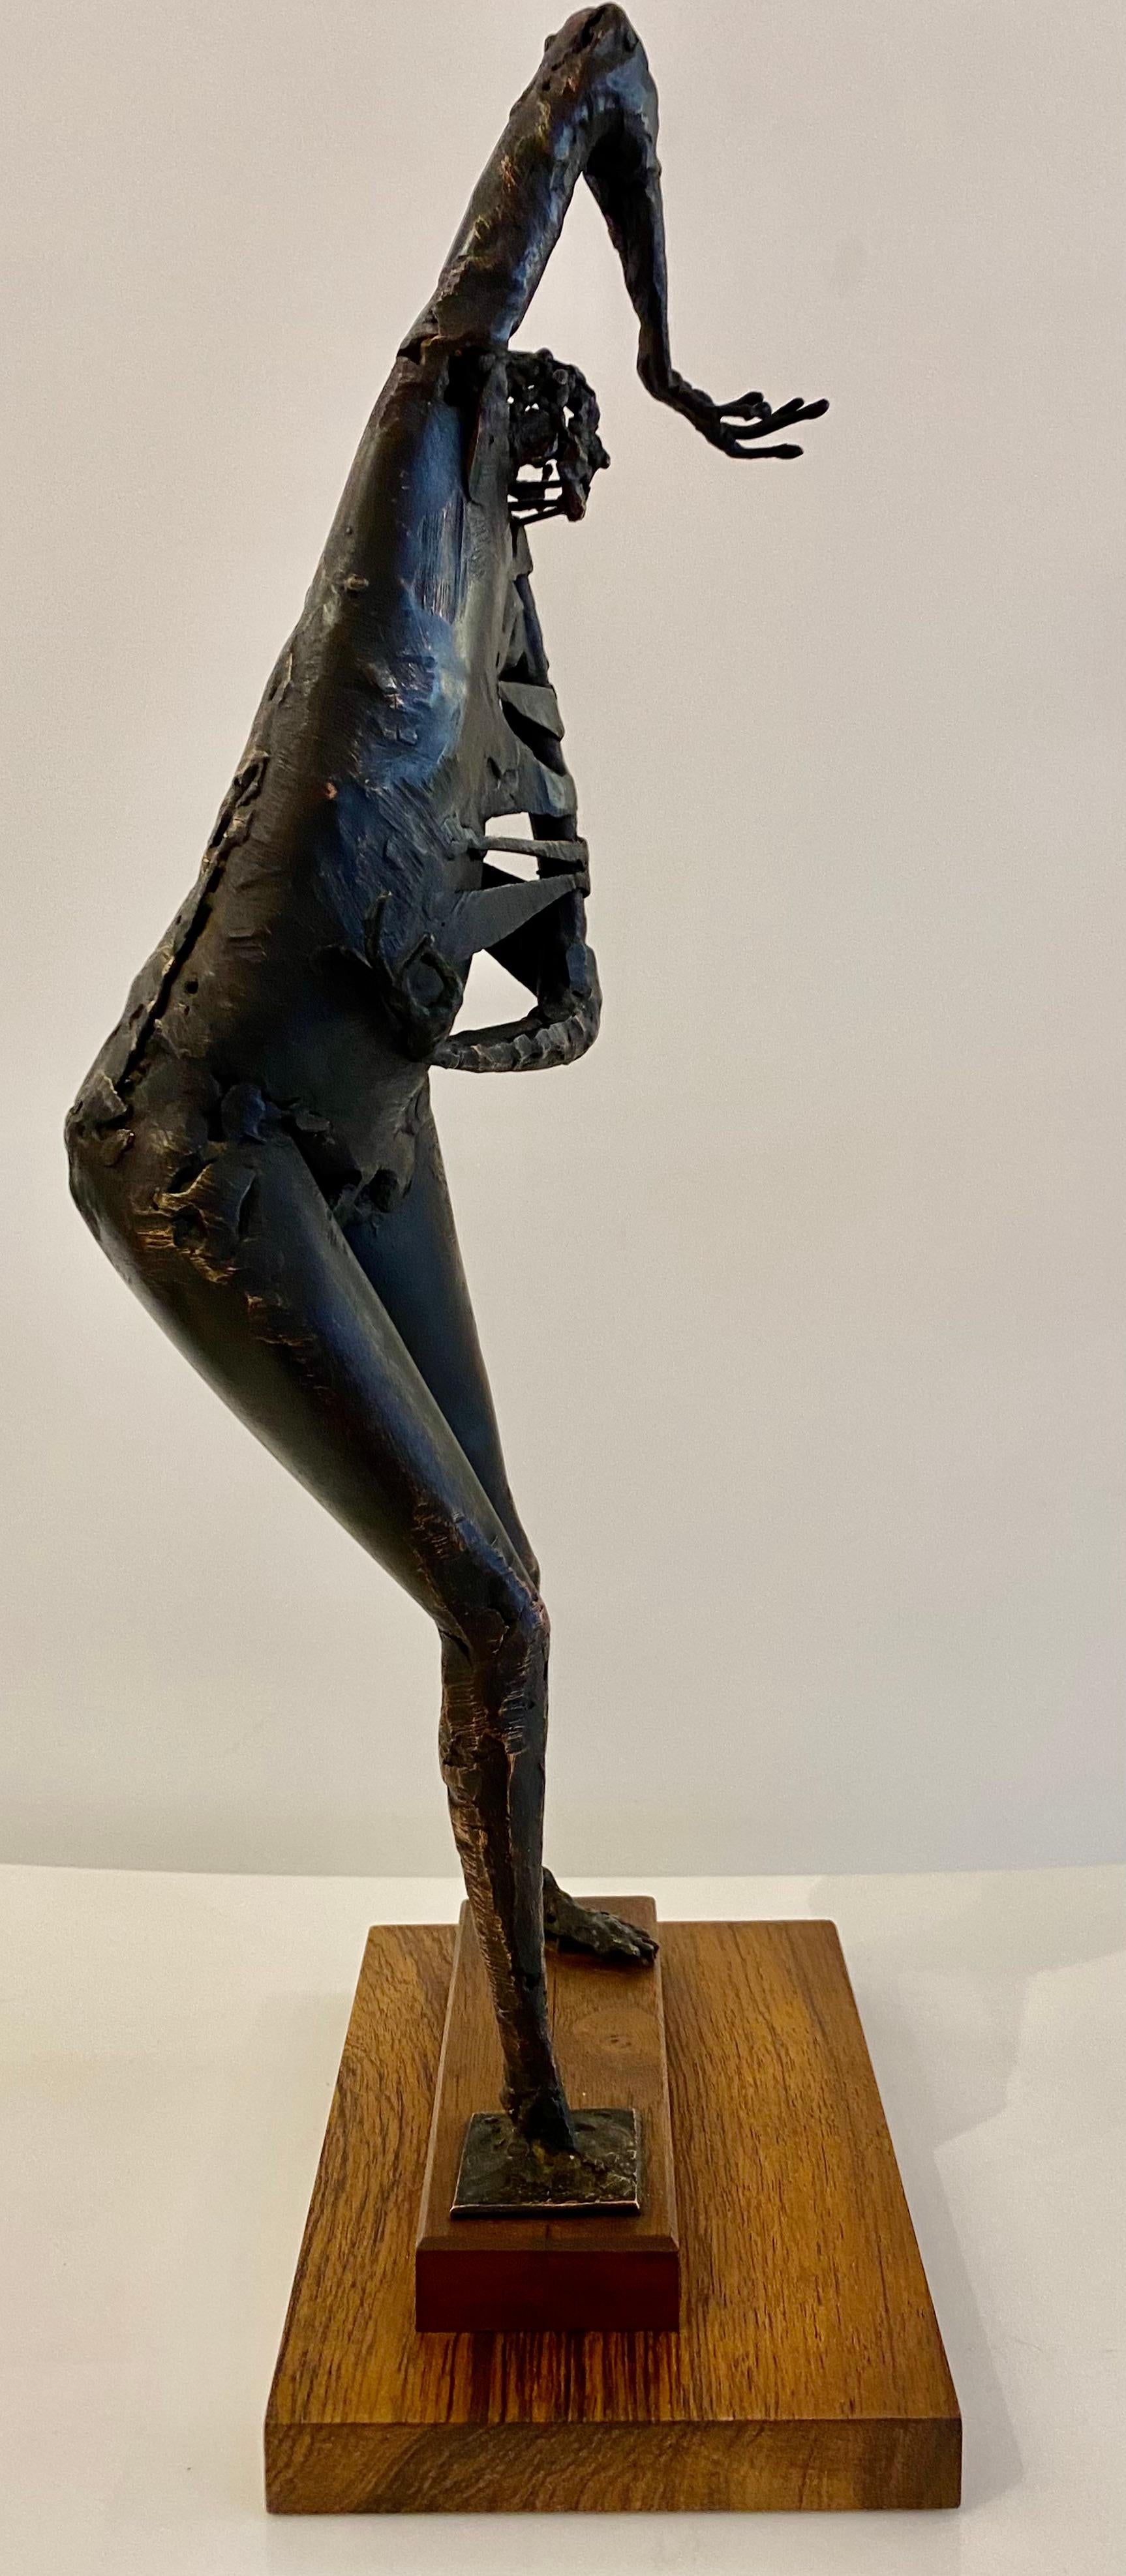 This abstract bronze figure is by California artist Robert Stoller (1936-). Striking from a distance, the position and the texture of the figure stand out on this piece. The sculpture is patinated in a rich liver bronze finish and is mounted on an